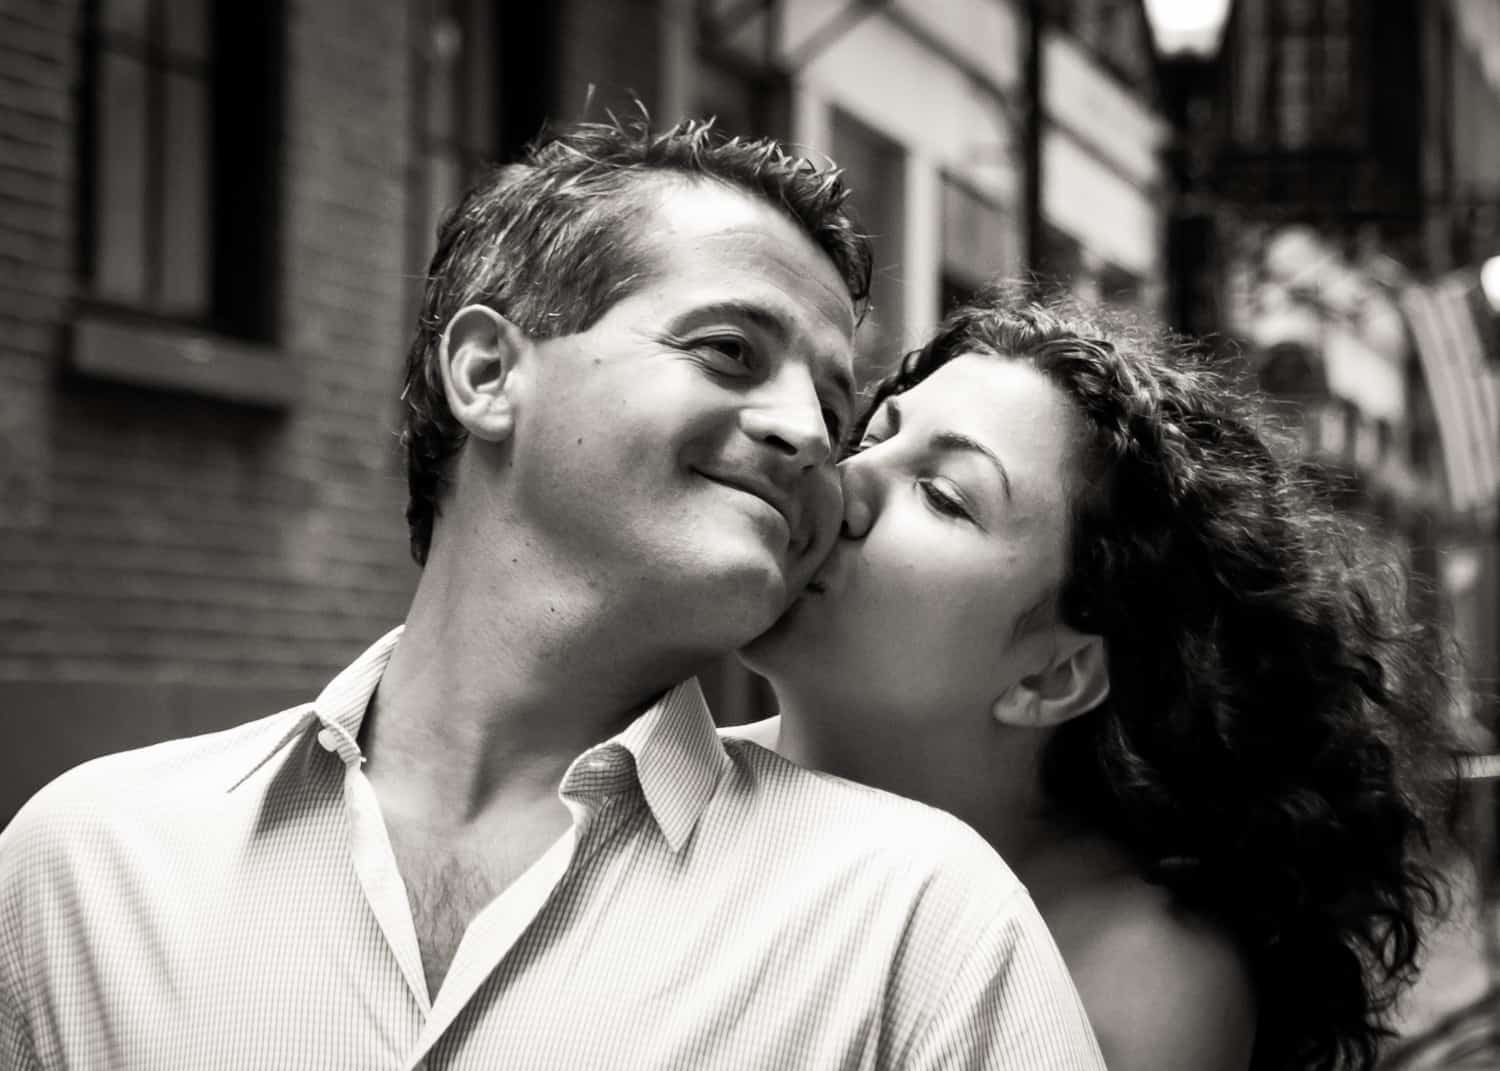 Black and white photo of woman kissing man on the cheek